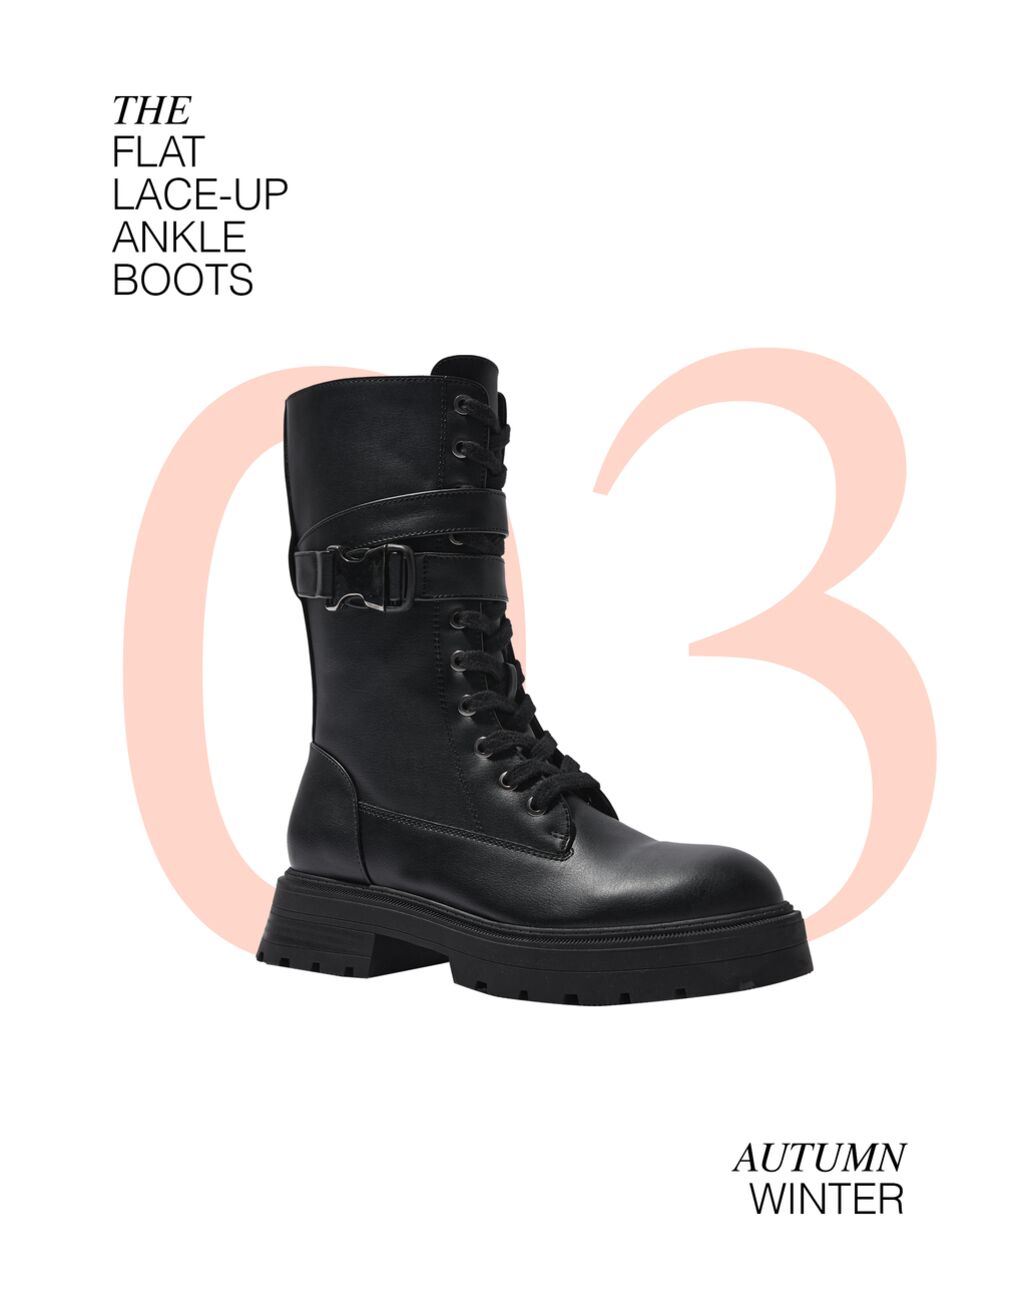 Flat lace-up high-leg ankle boots